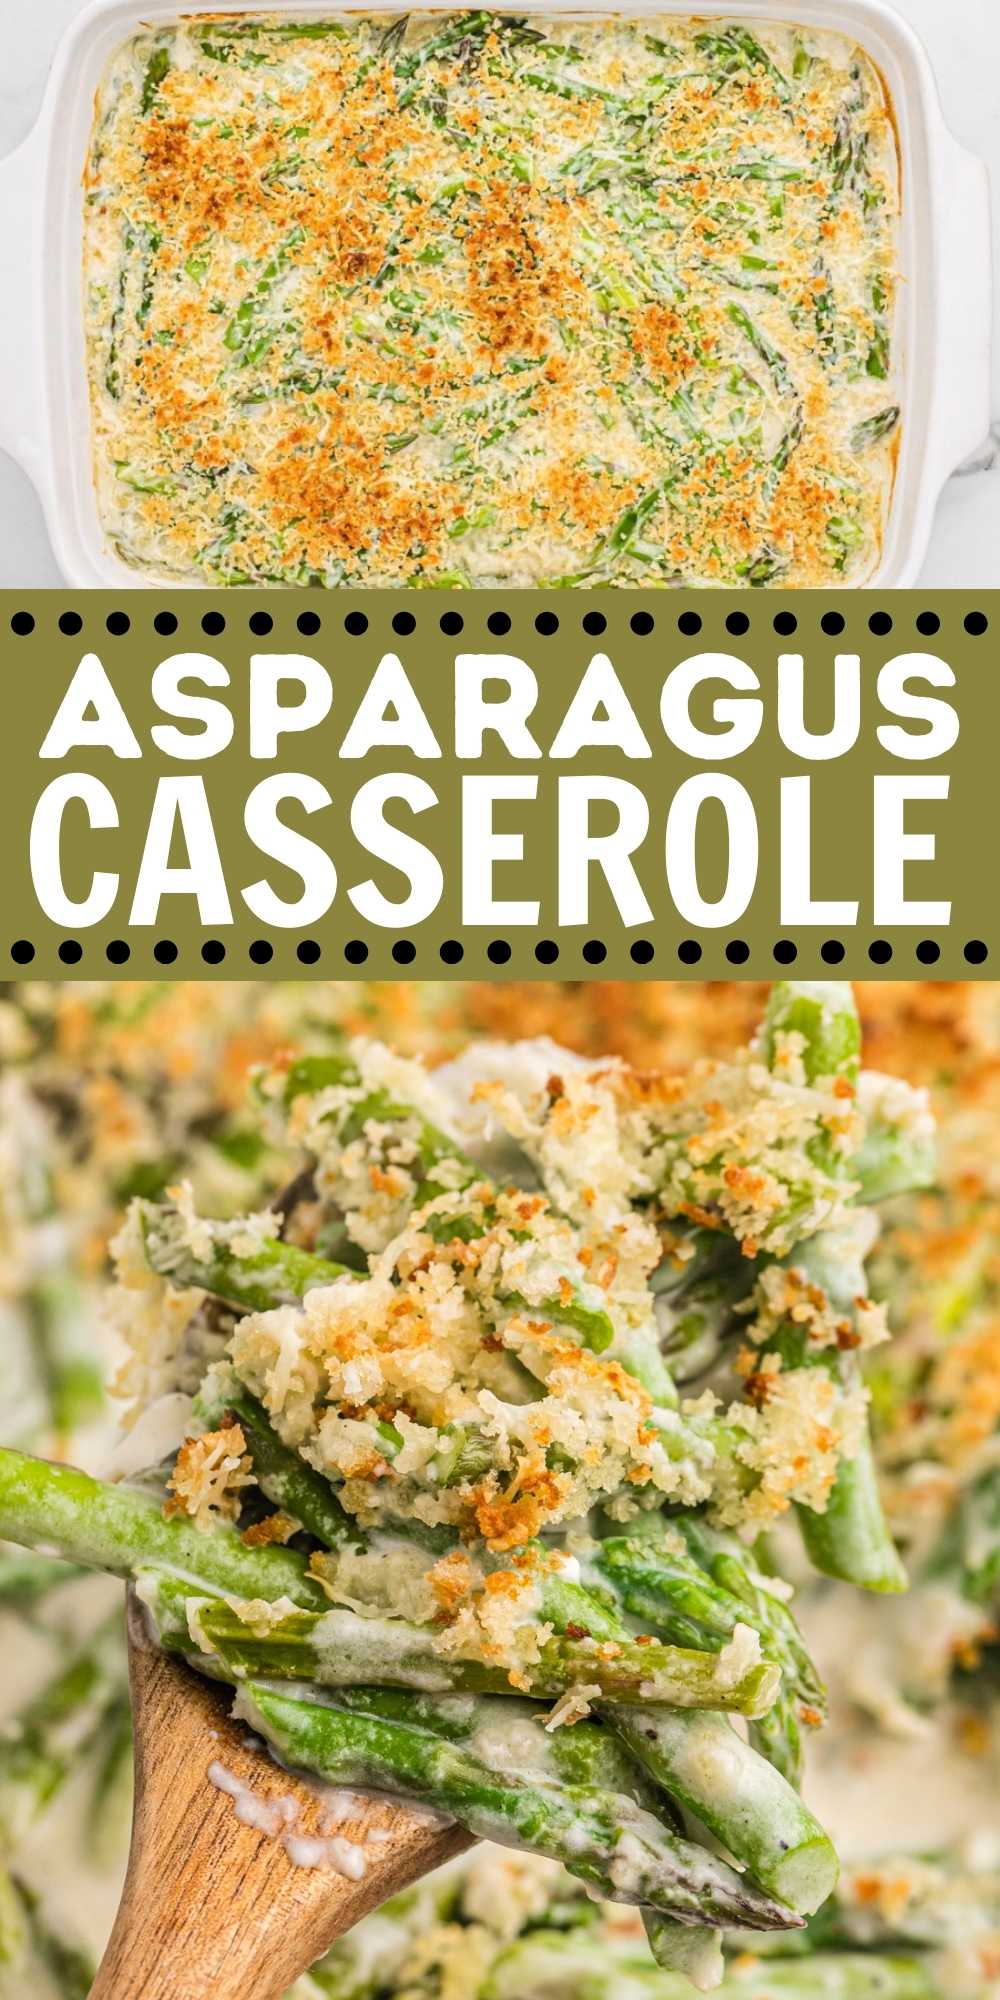 Asparagus Casserole has a creamy and cheesy filling topped with crispy bread crumbs. It is an easy and delicious side dish to serve. The perfect casserole for all your holiday dinners. #eatingonadime #asparaguscasserole #holidayrecipes